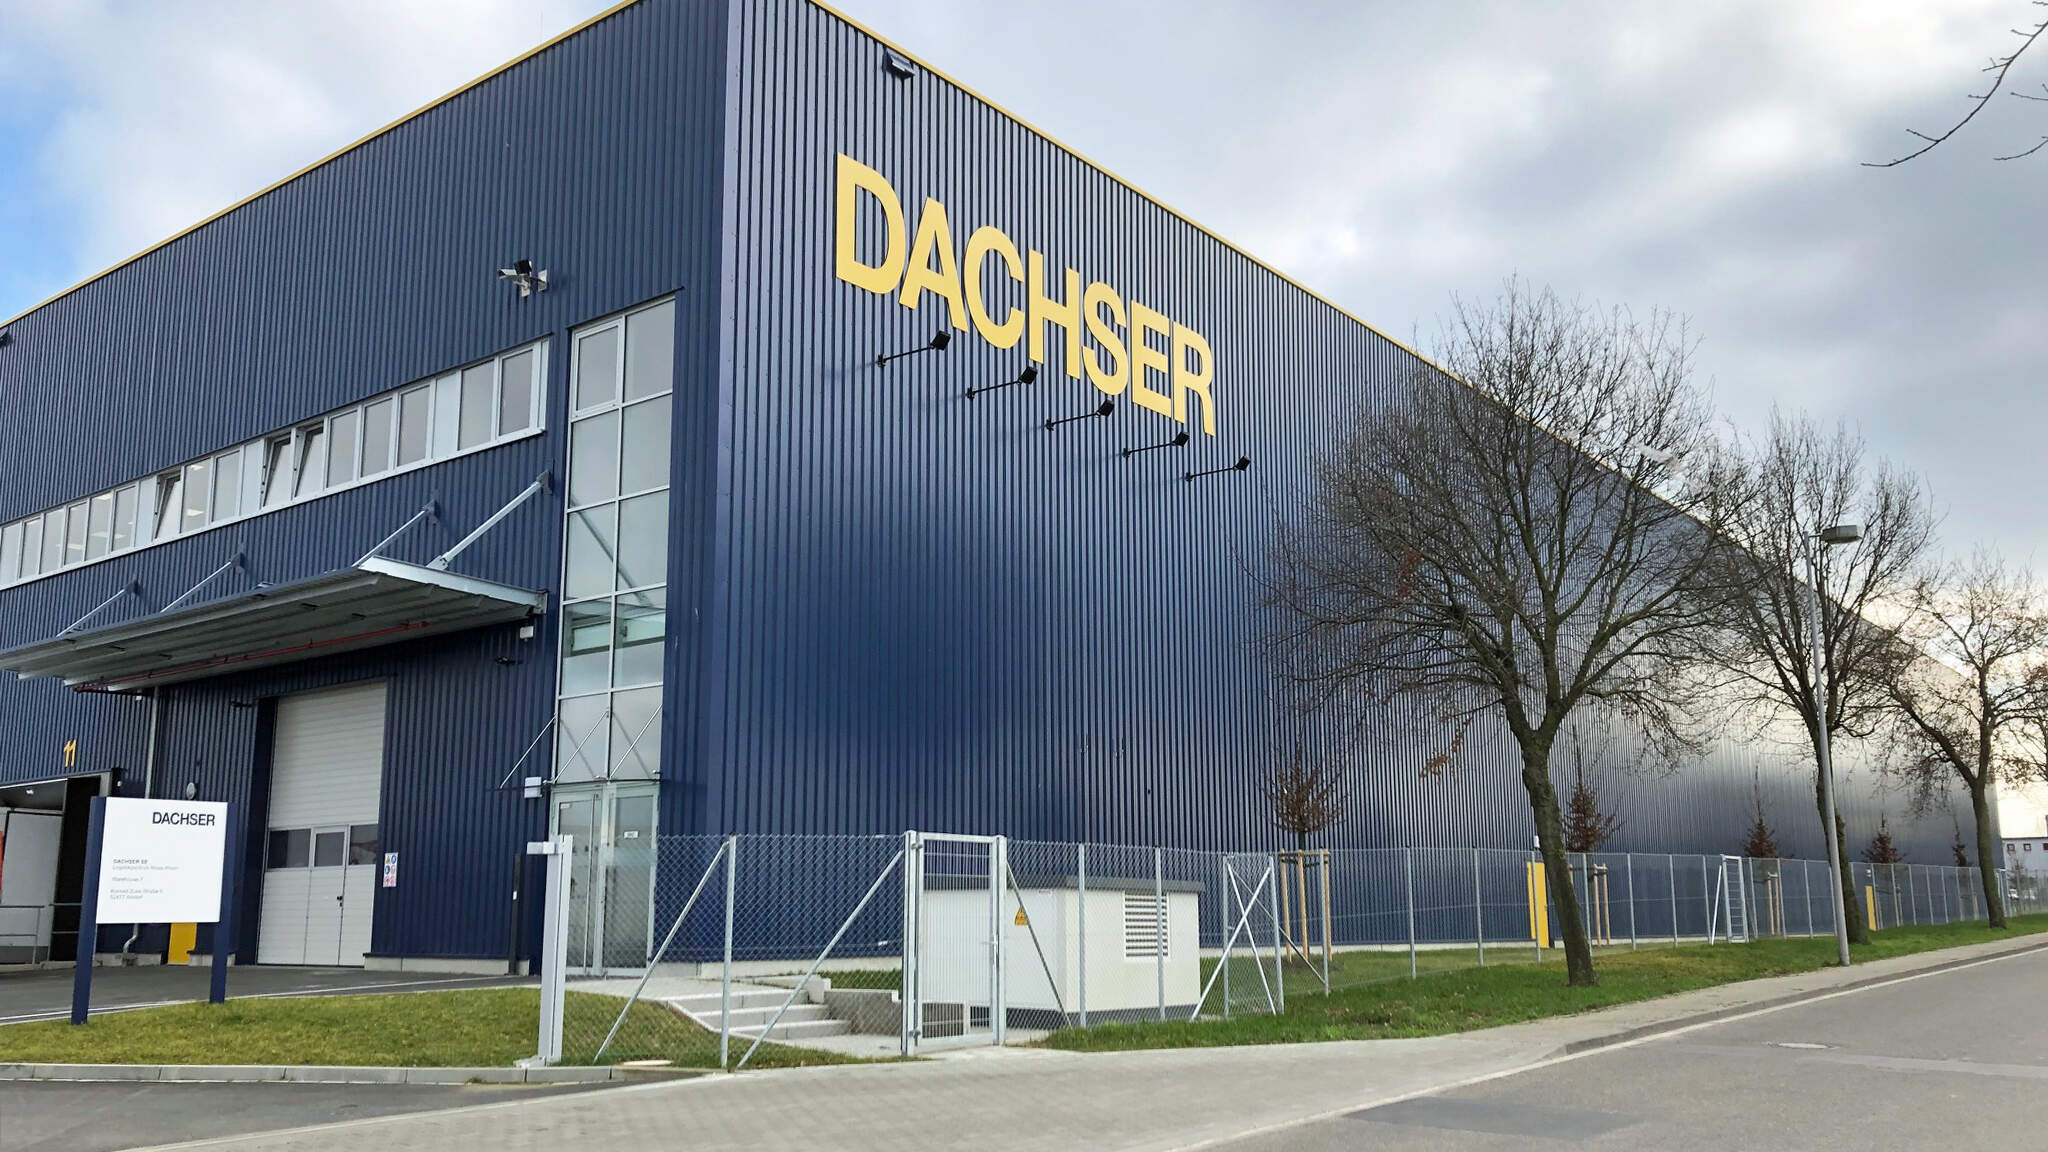 DACHSER expands its contract logistics capacities for Maas-Rhein logistics center